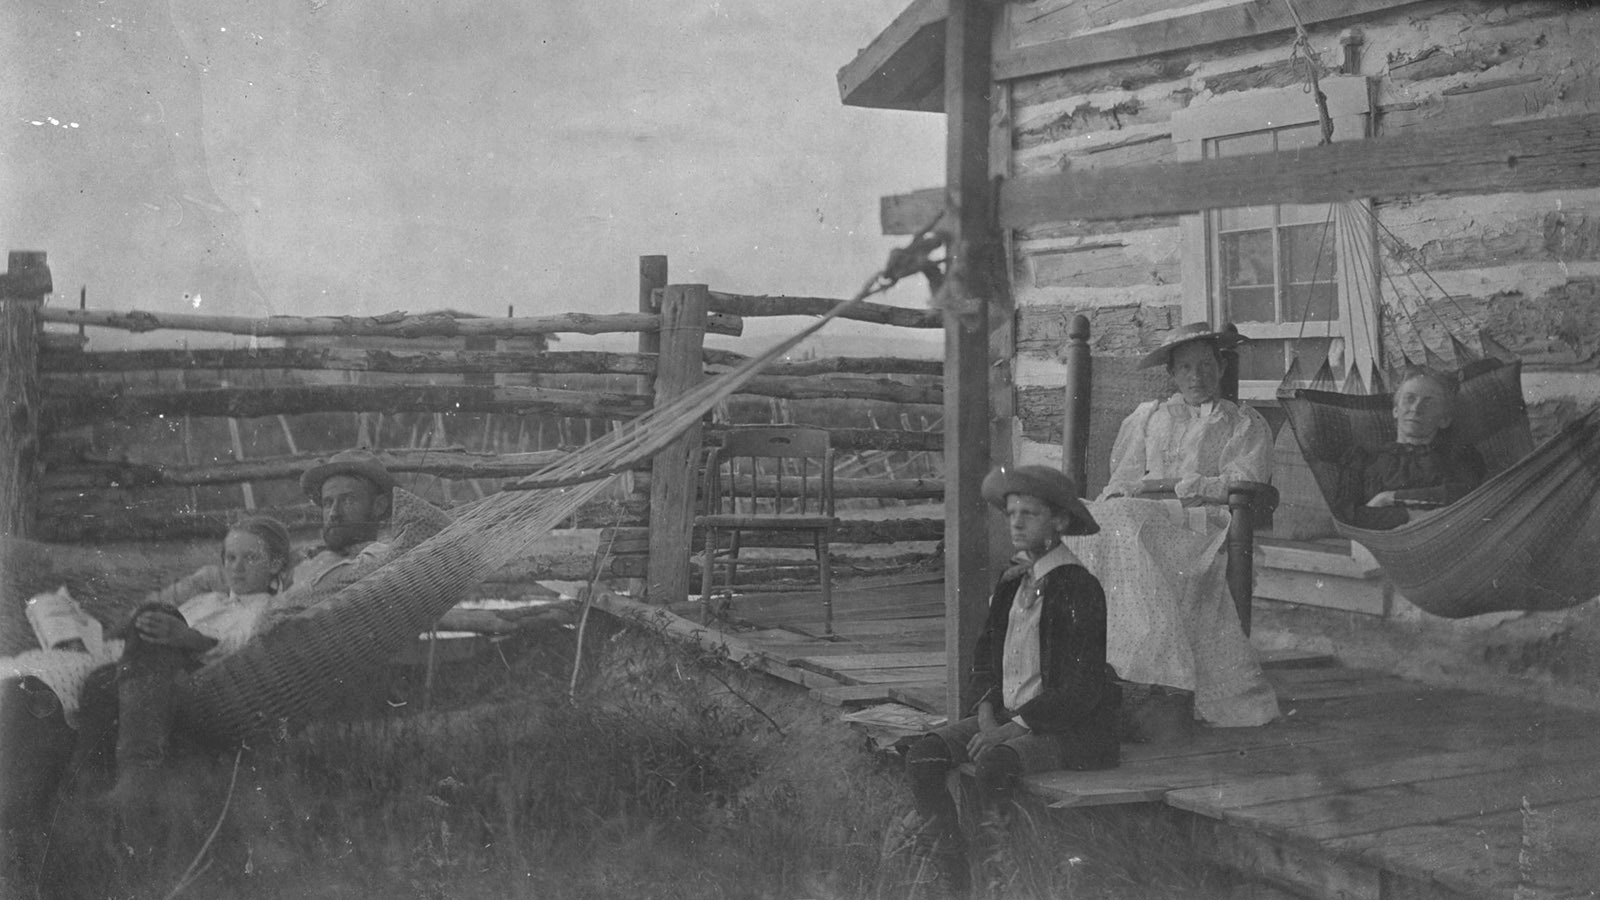 A younger Albert Bothwell on the ranch with his family.